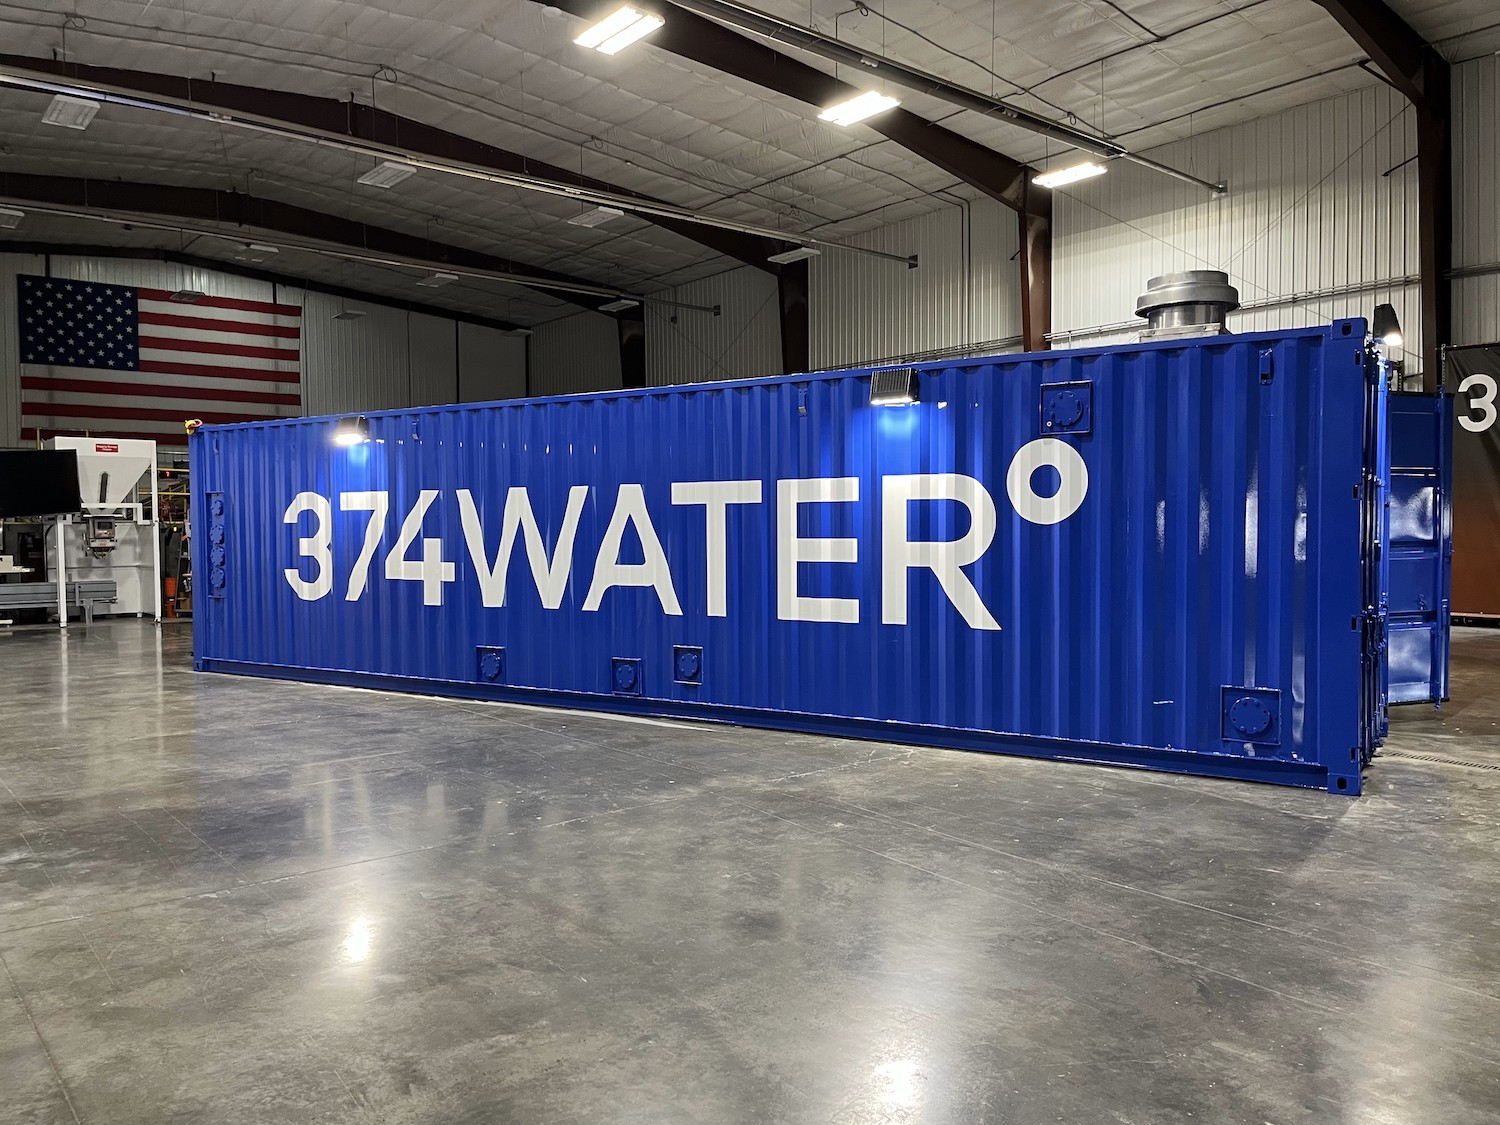 374Water container that can eliminate PFAS from water